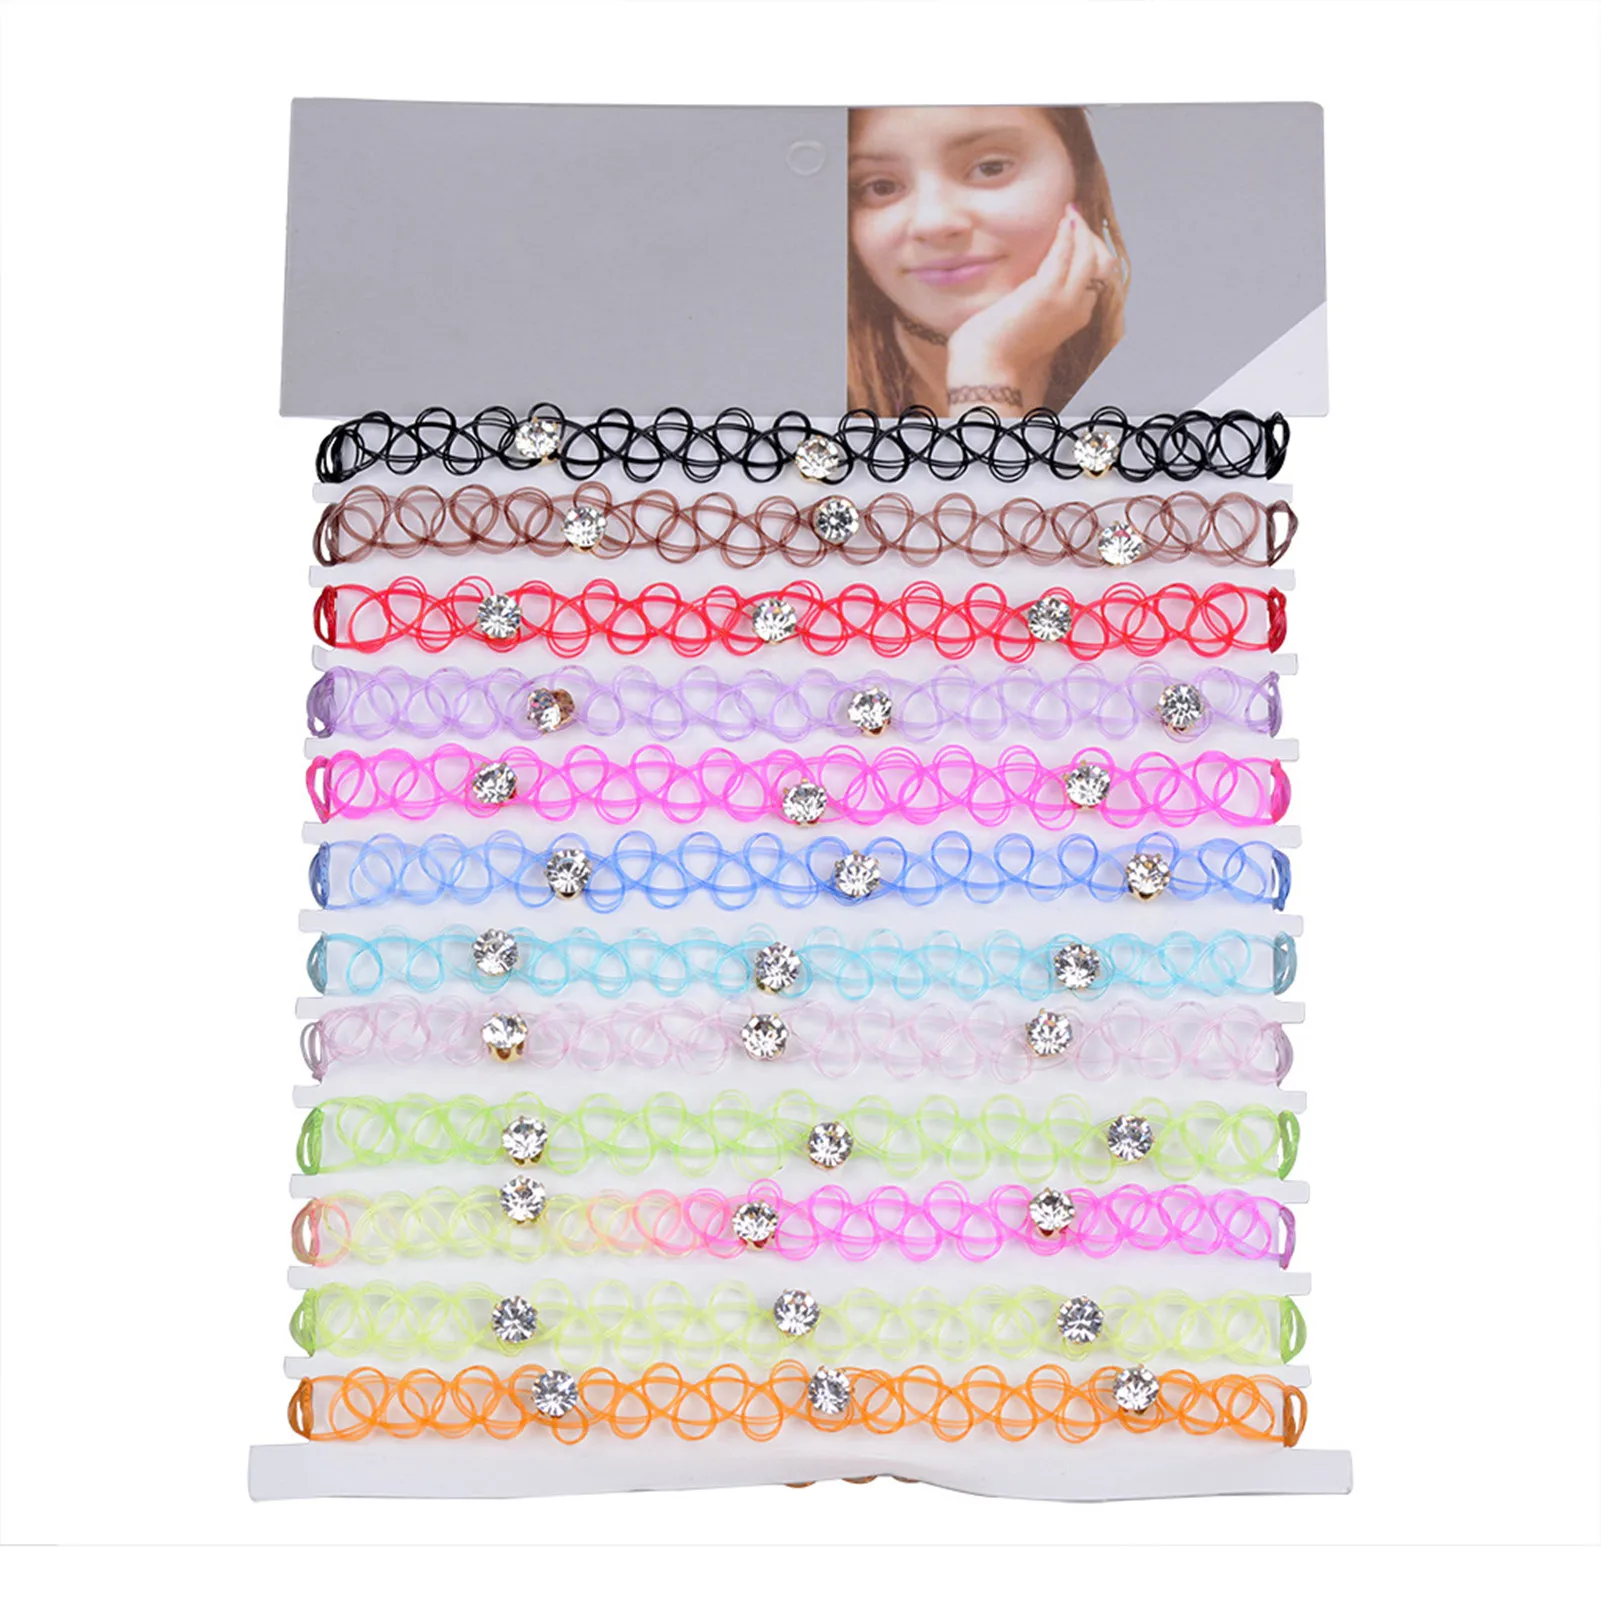 

12pcs/lot New Collares Vintage Stretch Tattoo Choker Necklaces Fashion Chokers For Girl Charm Elastic Necklace Female Wedding